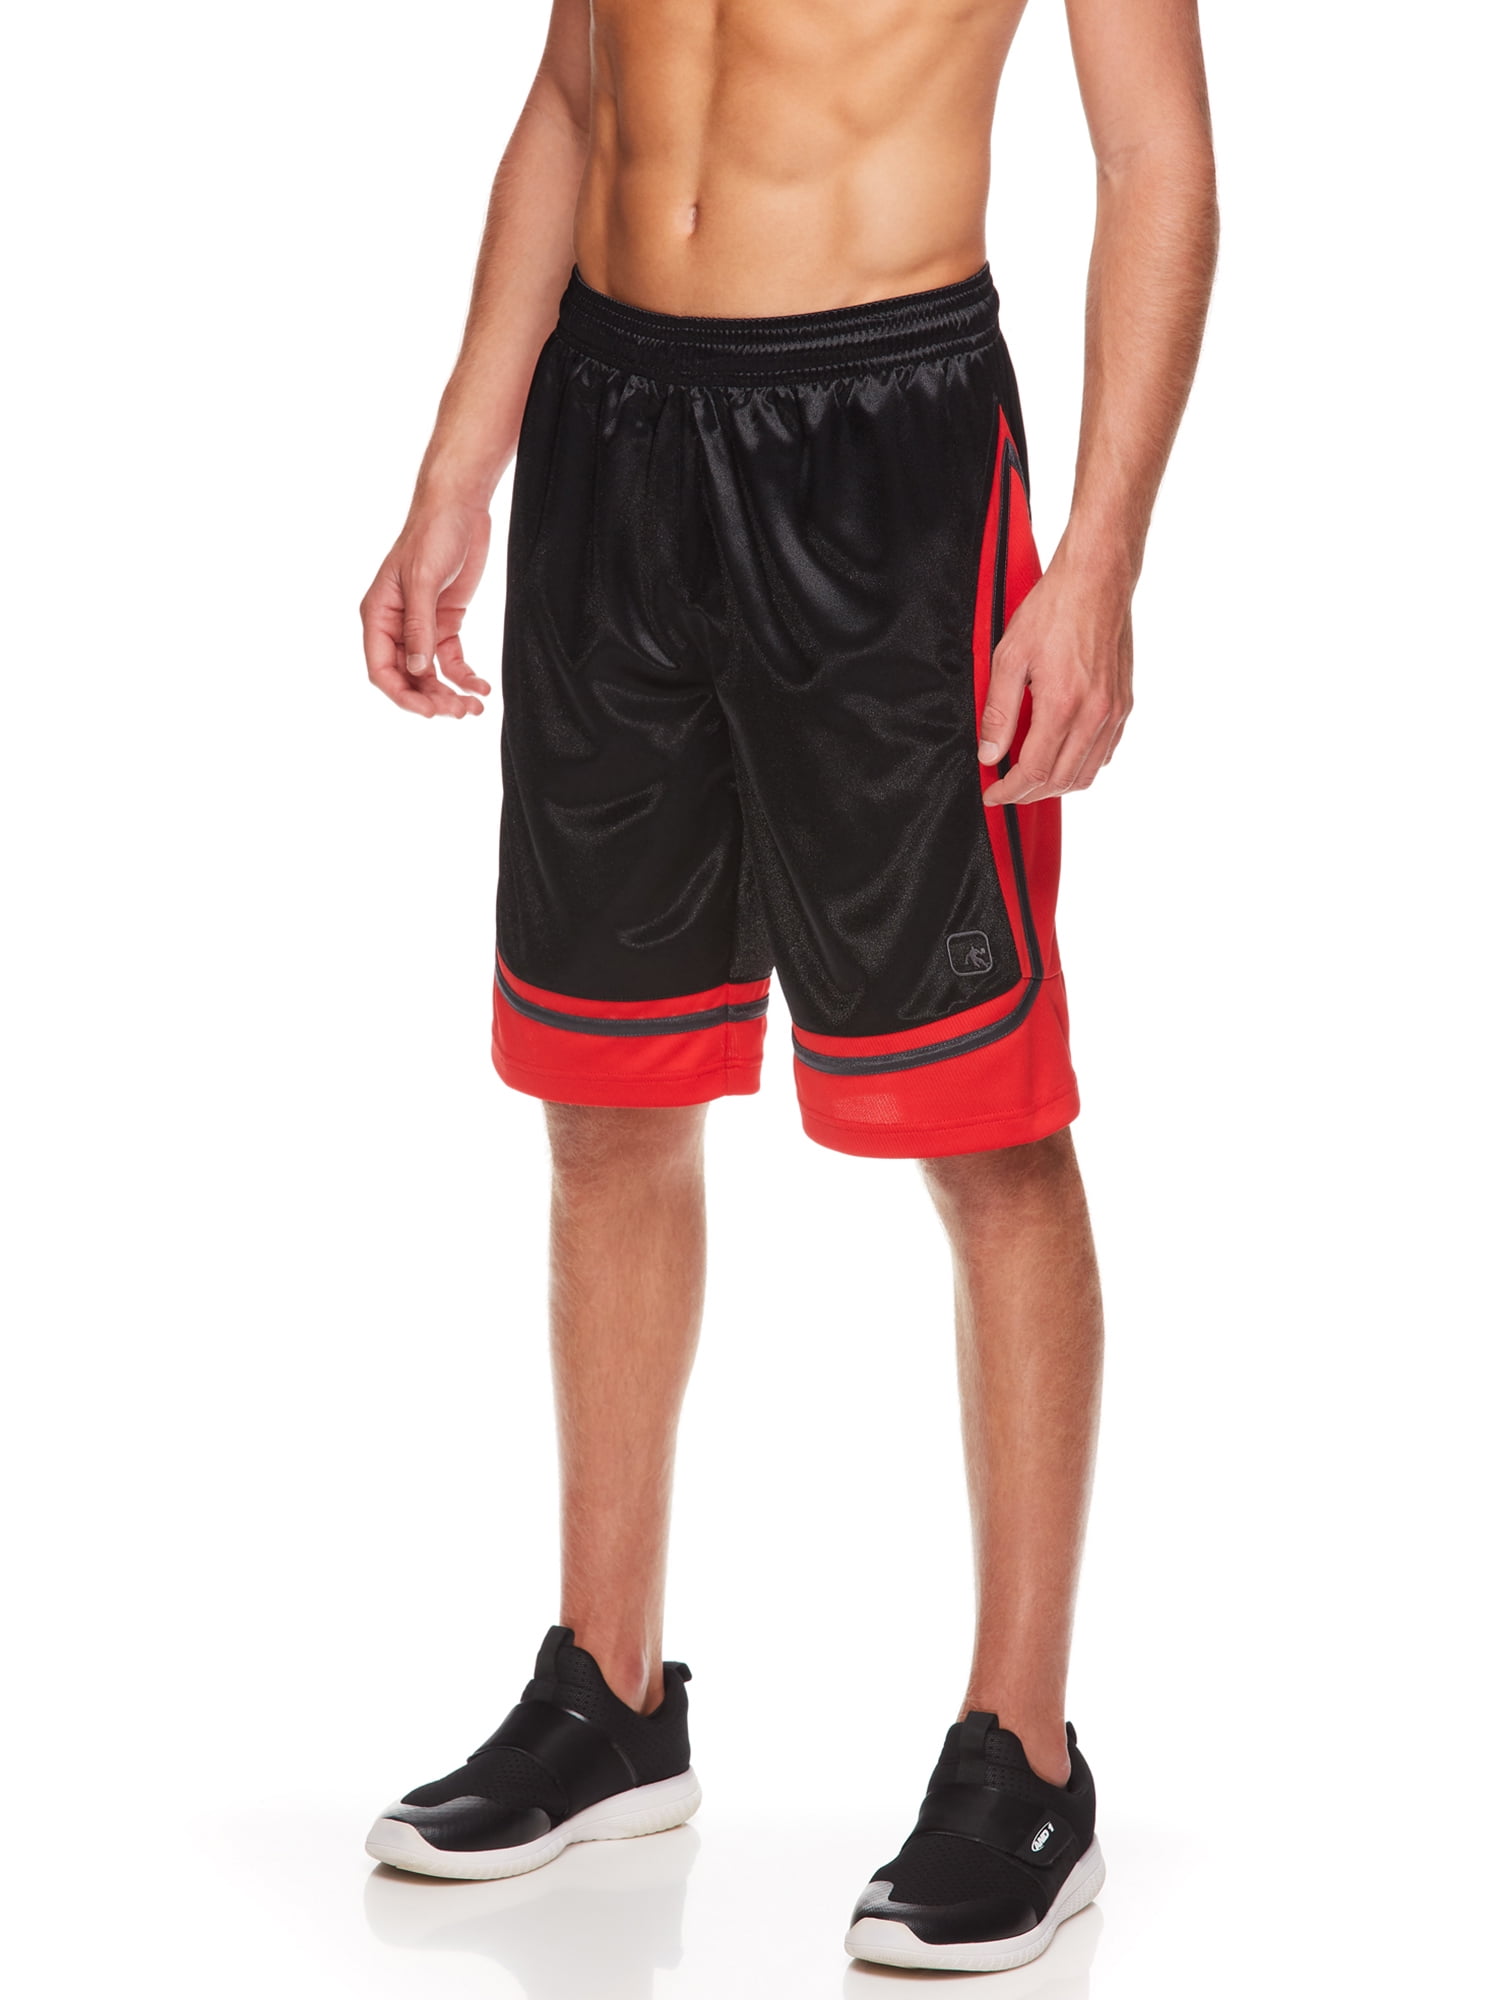 AND1 Court Vision Ultra Light Athletic Basketball Shorts ***NEW WITH TAGS*** 